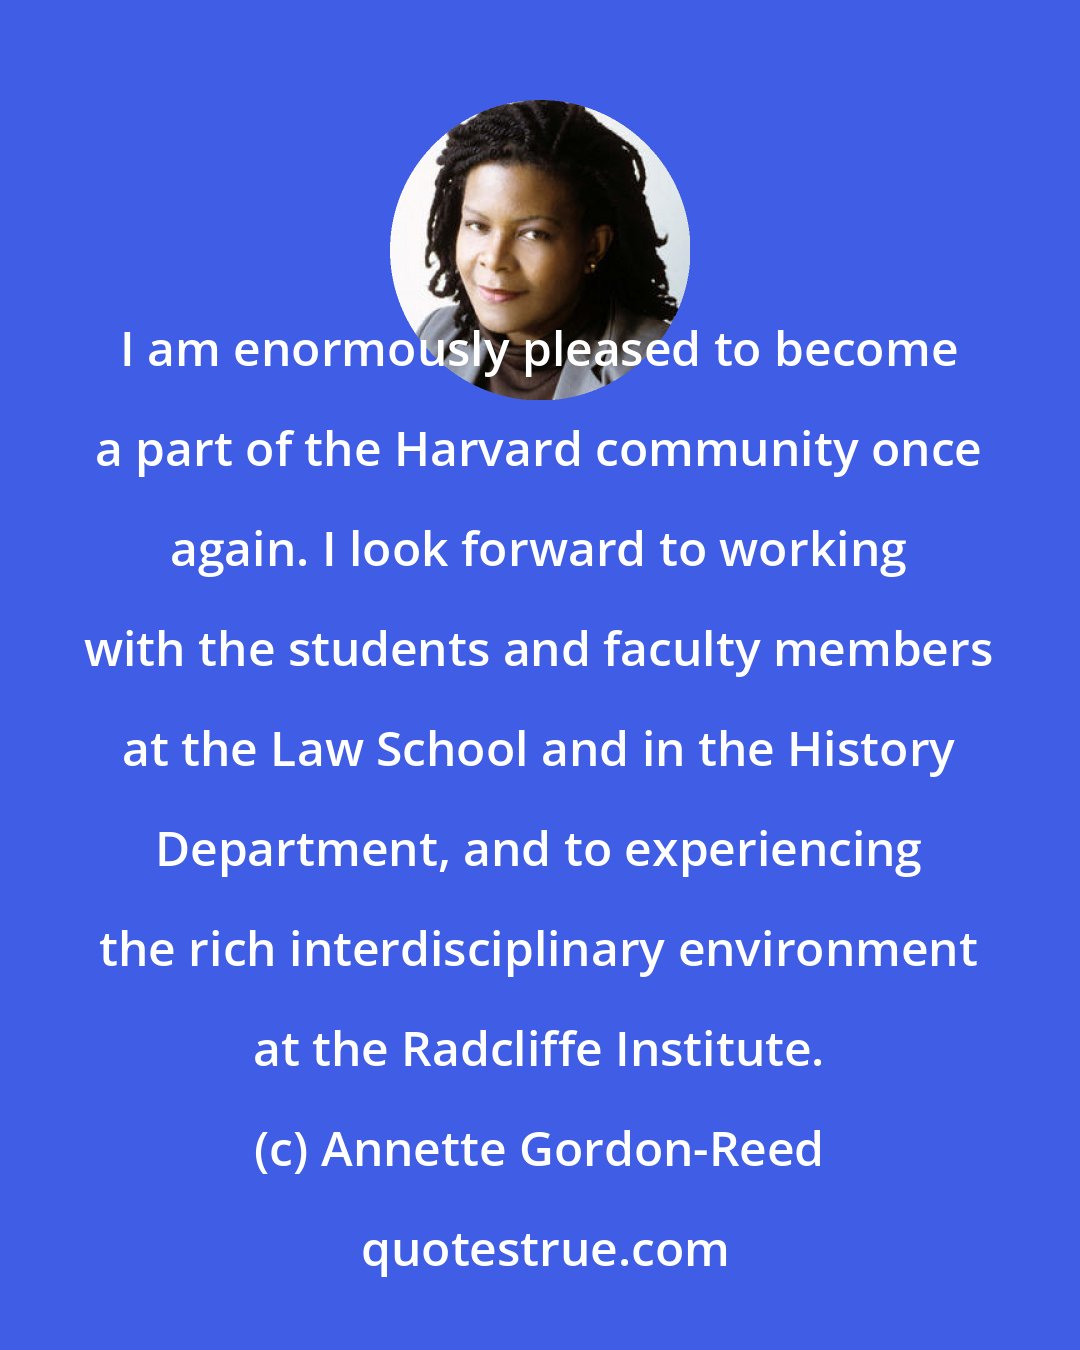 Annette Gordon-Reed: I am enormously pleased to become a part of the Harvard community once again. I look forward to working with the students and faculty members at the Law School and in the History Department, and to experiencing the rich interdisciplinary environment at the Radcliffe Institute.